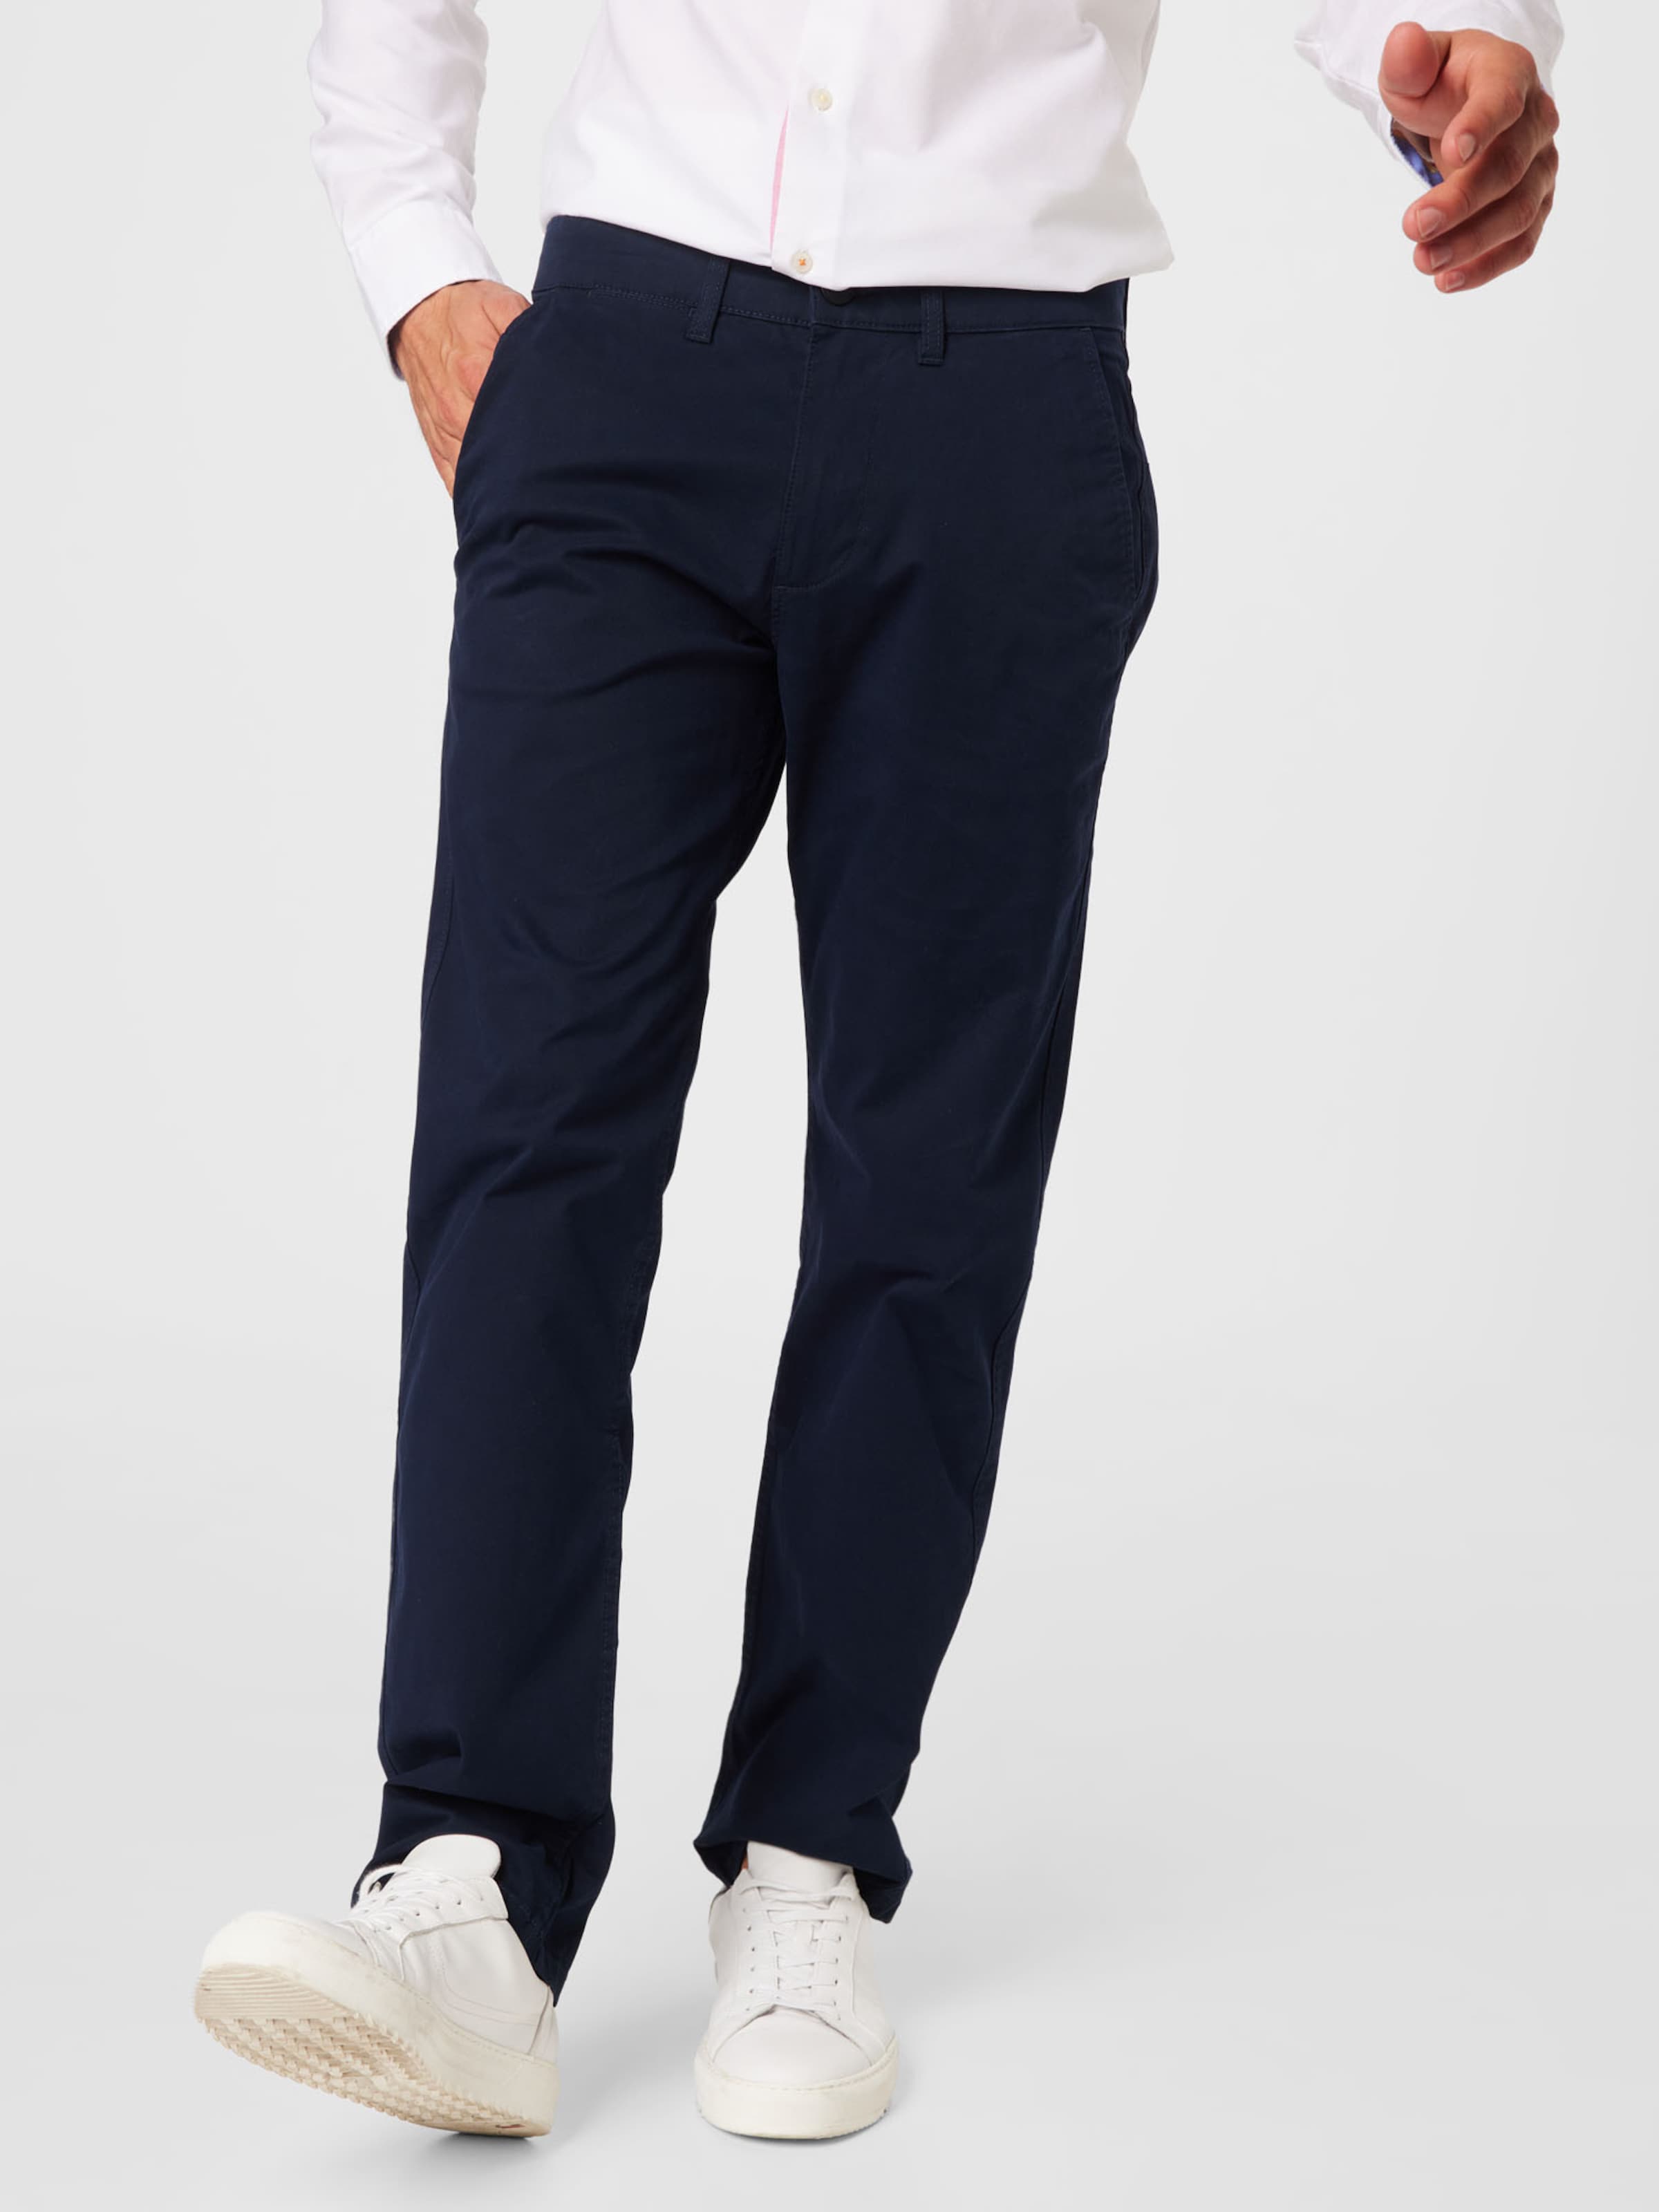 Product Name: *Stylish Mens Cotton Trouser ...